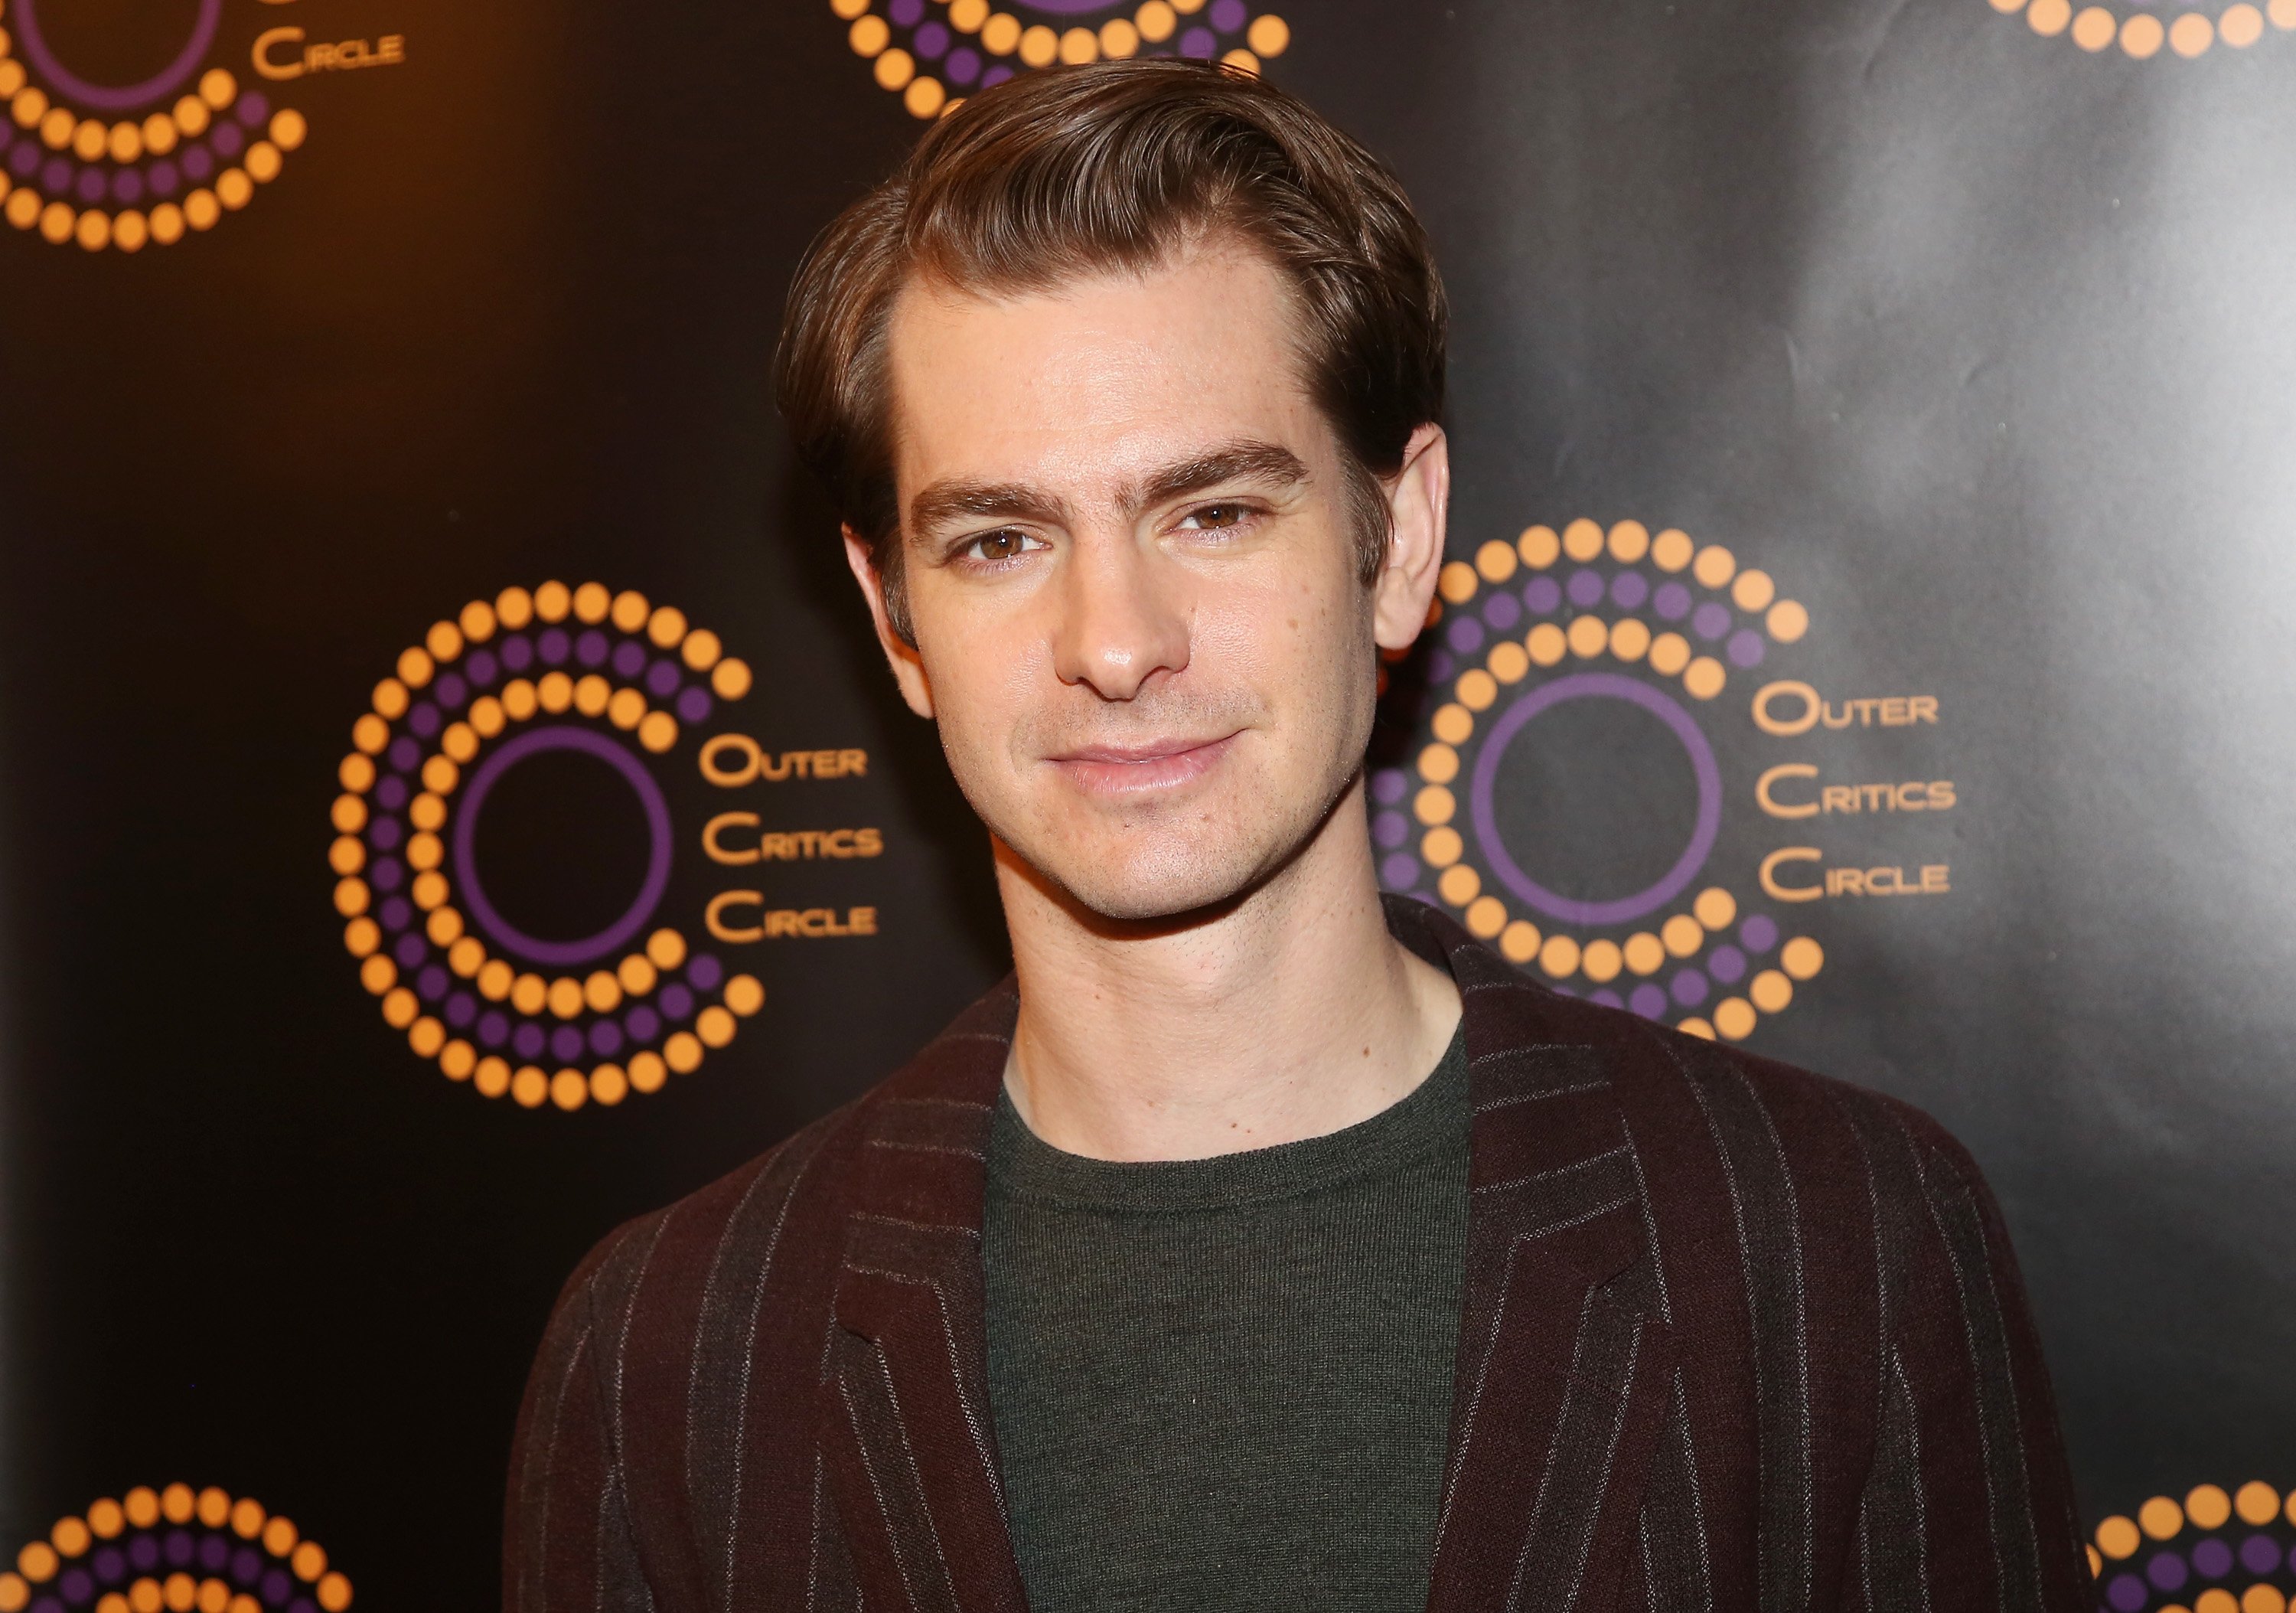 'Spider-Man: No Way Home' star Andrew Garfield wears a dark red and gray striped blazer over a gray shirt.